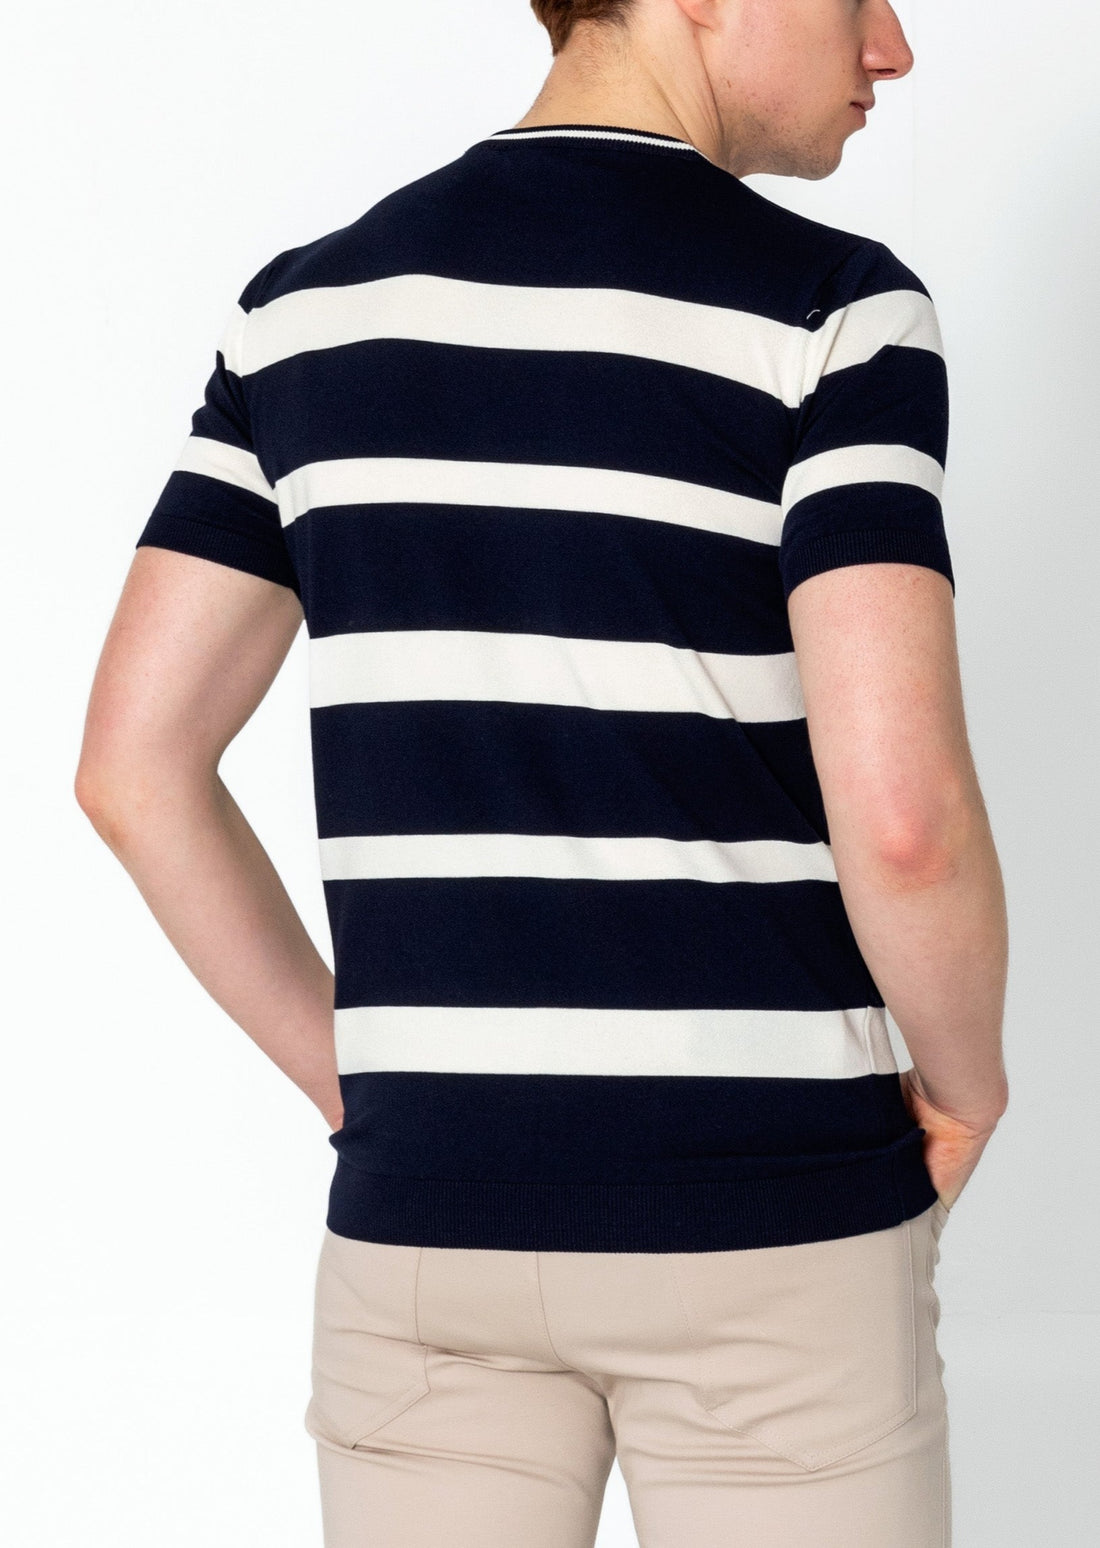 Crew-neck Knitted Striped Shirt - Navy